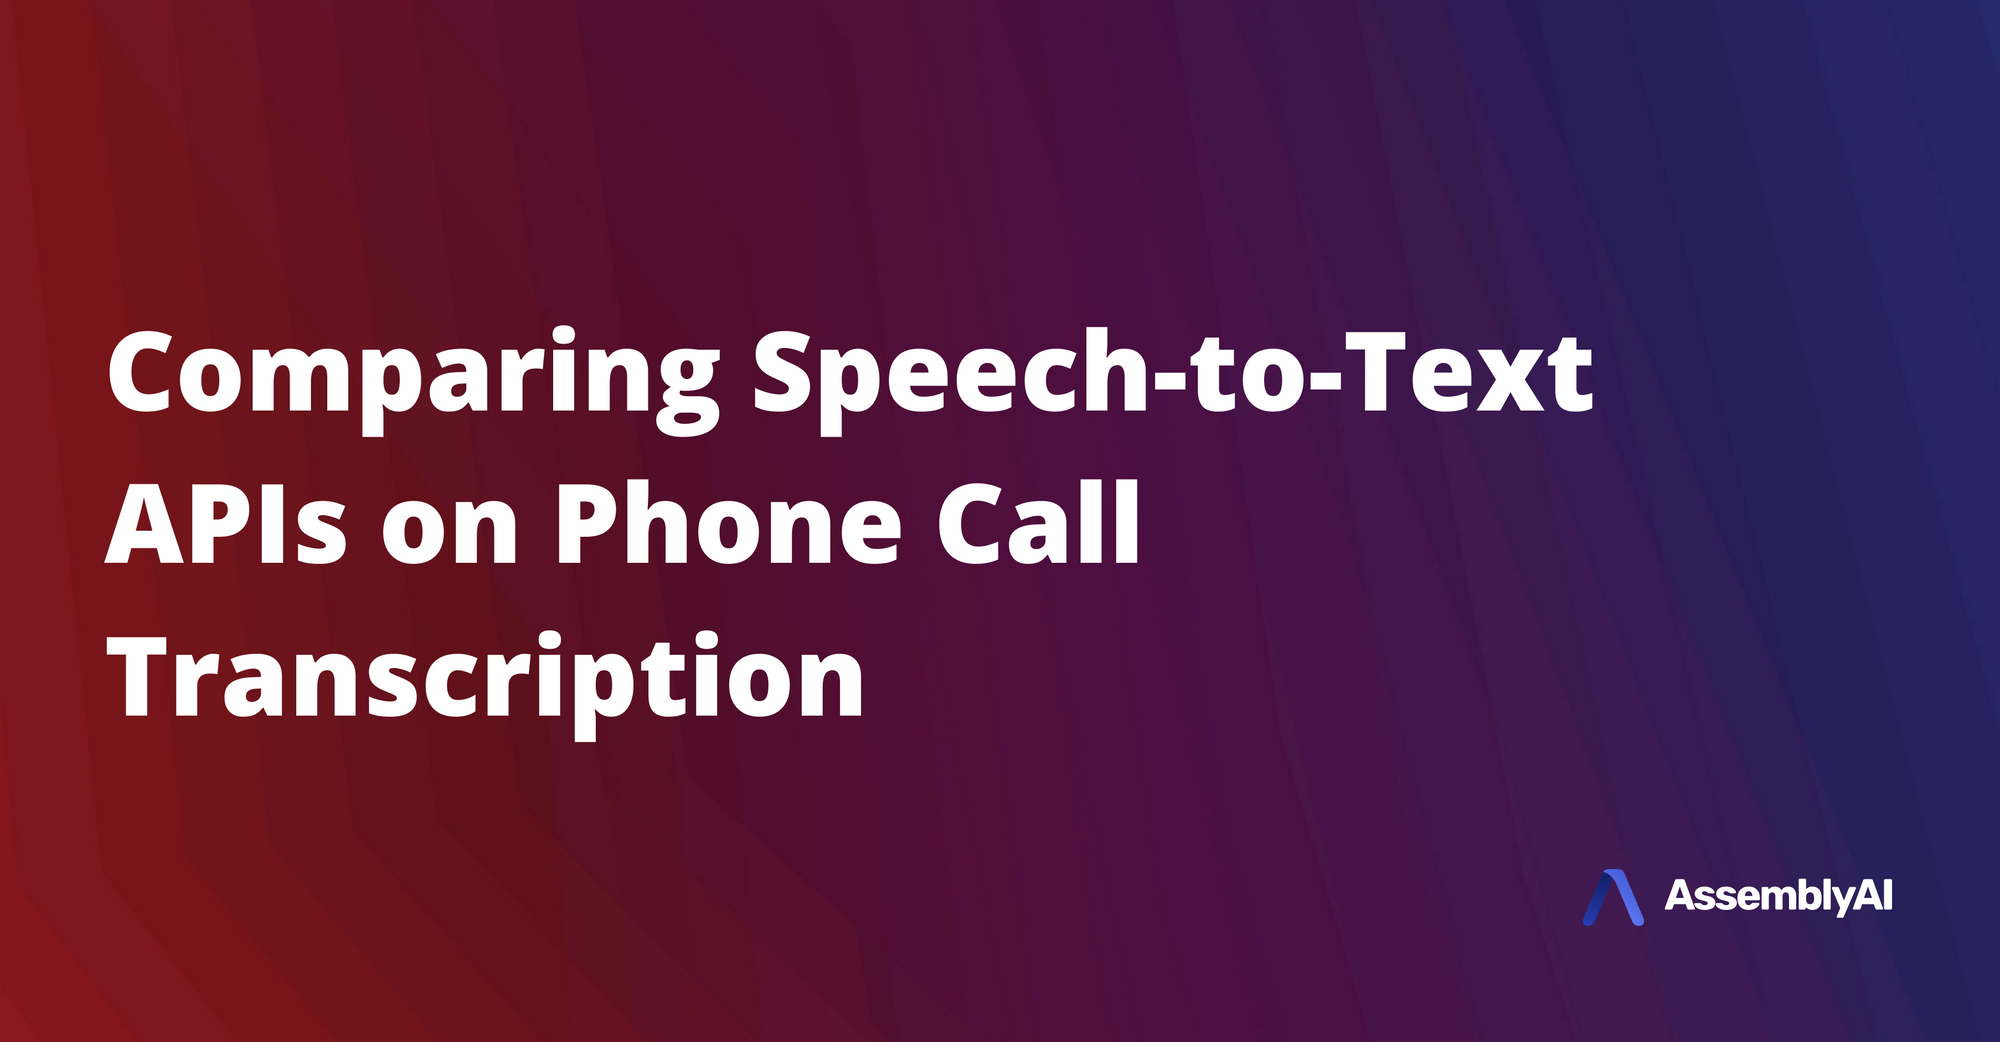 Comparing Speech-to-Text APIs on Phone Call Transcription